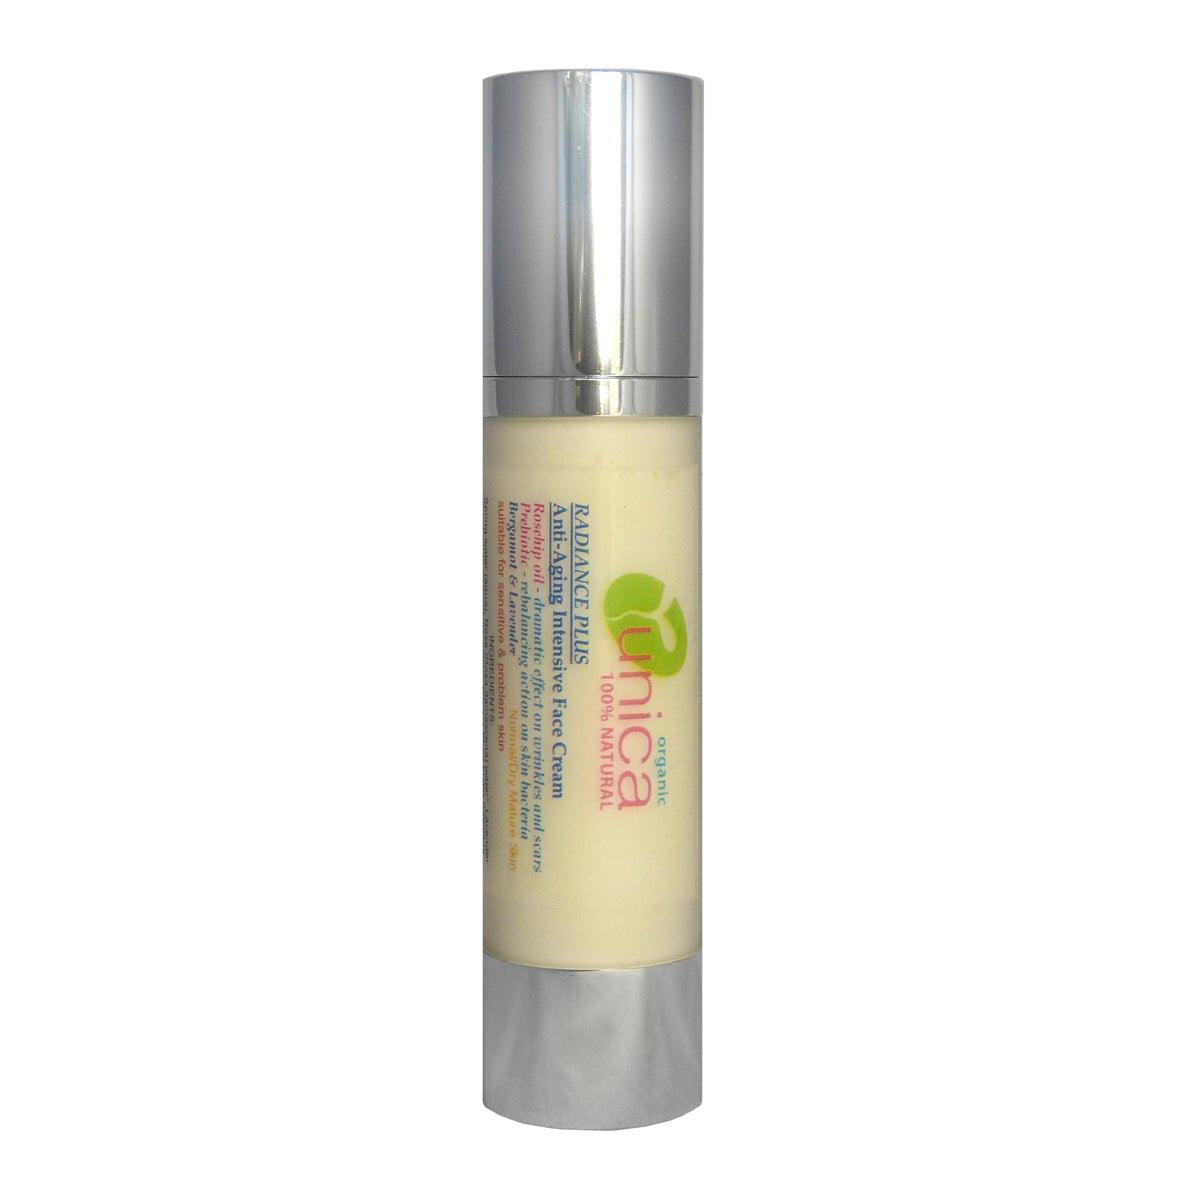 Organic face cream with Prebiotics for normal to dry skin in airless tube. Suitable for sensitive skin eczema, psoriasis. 